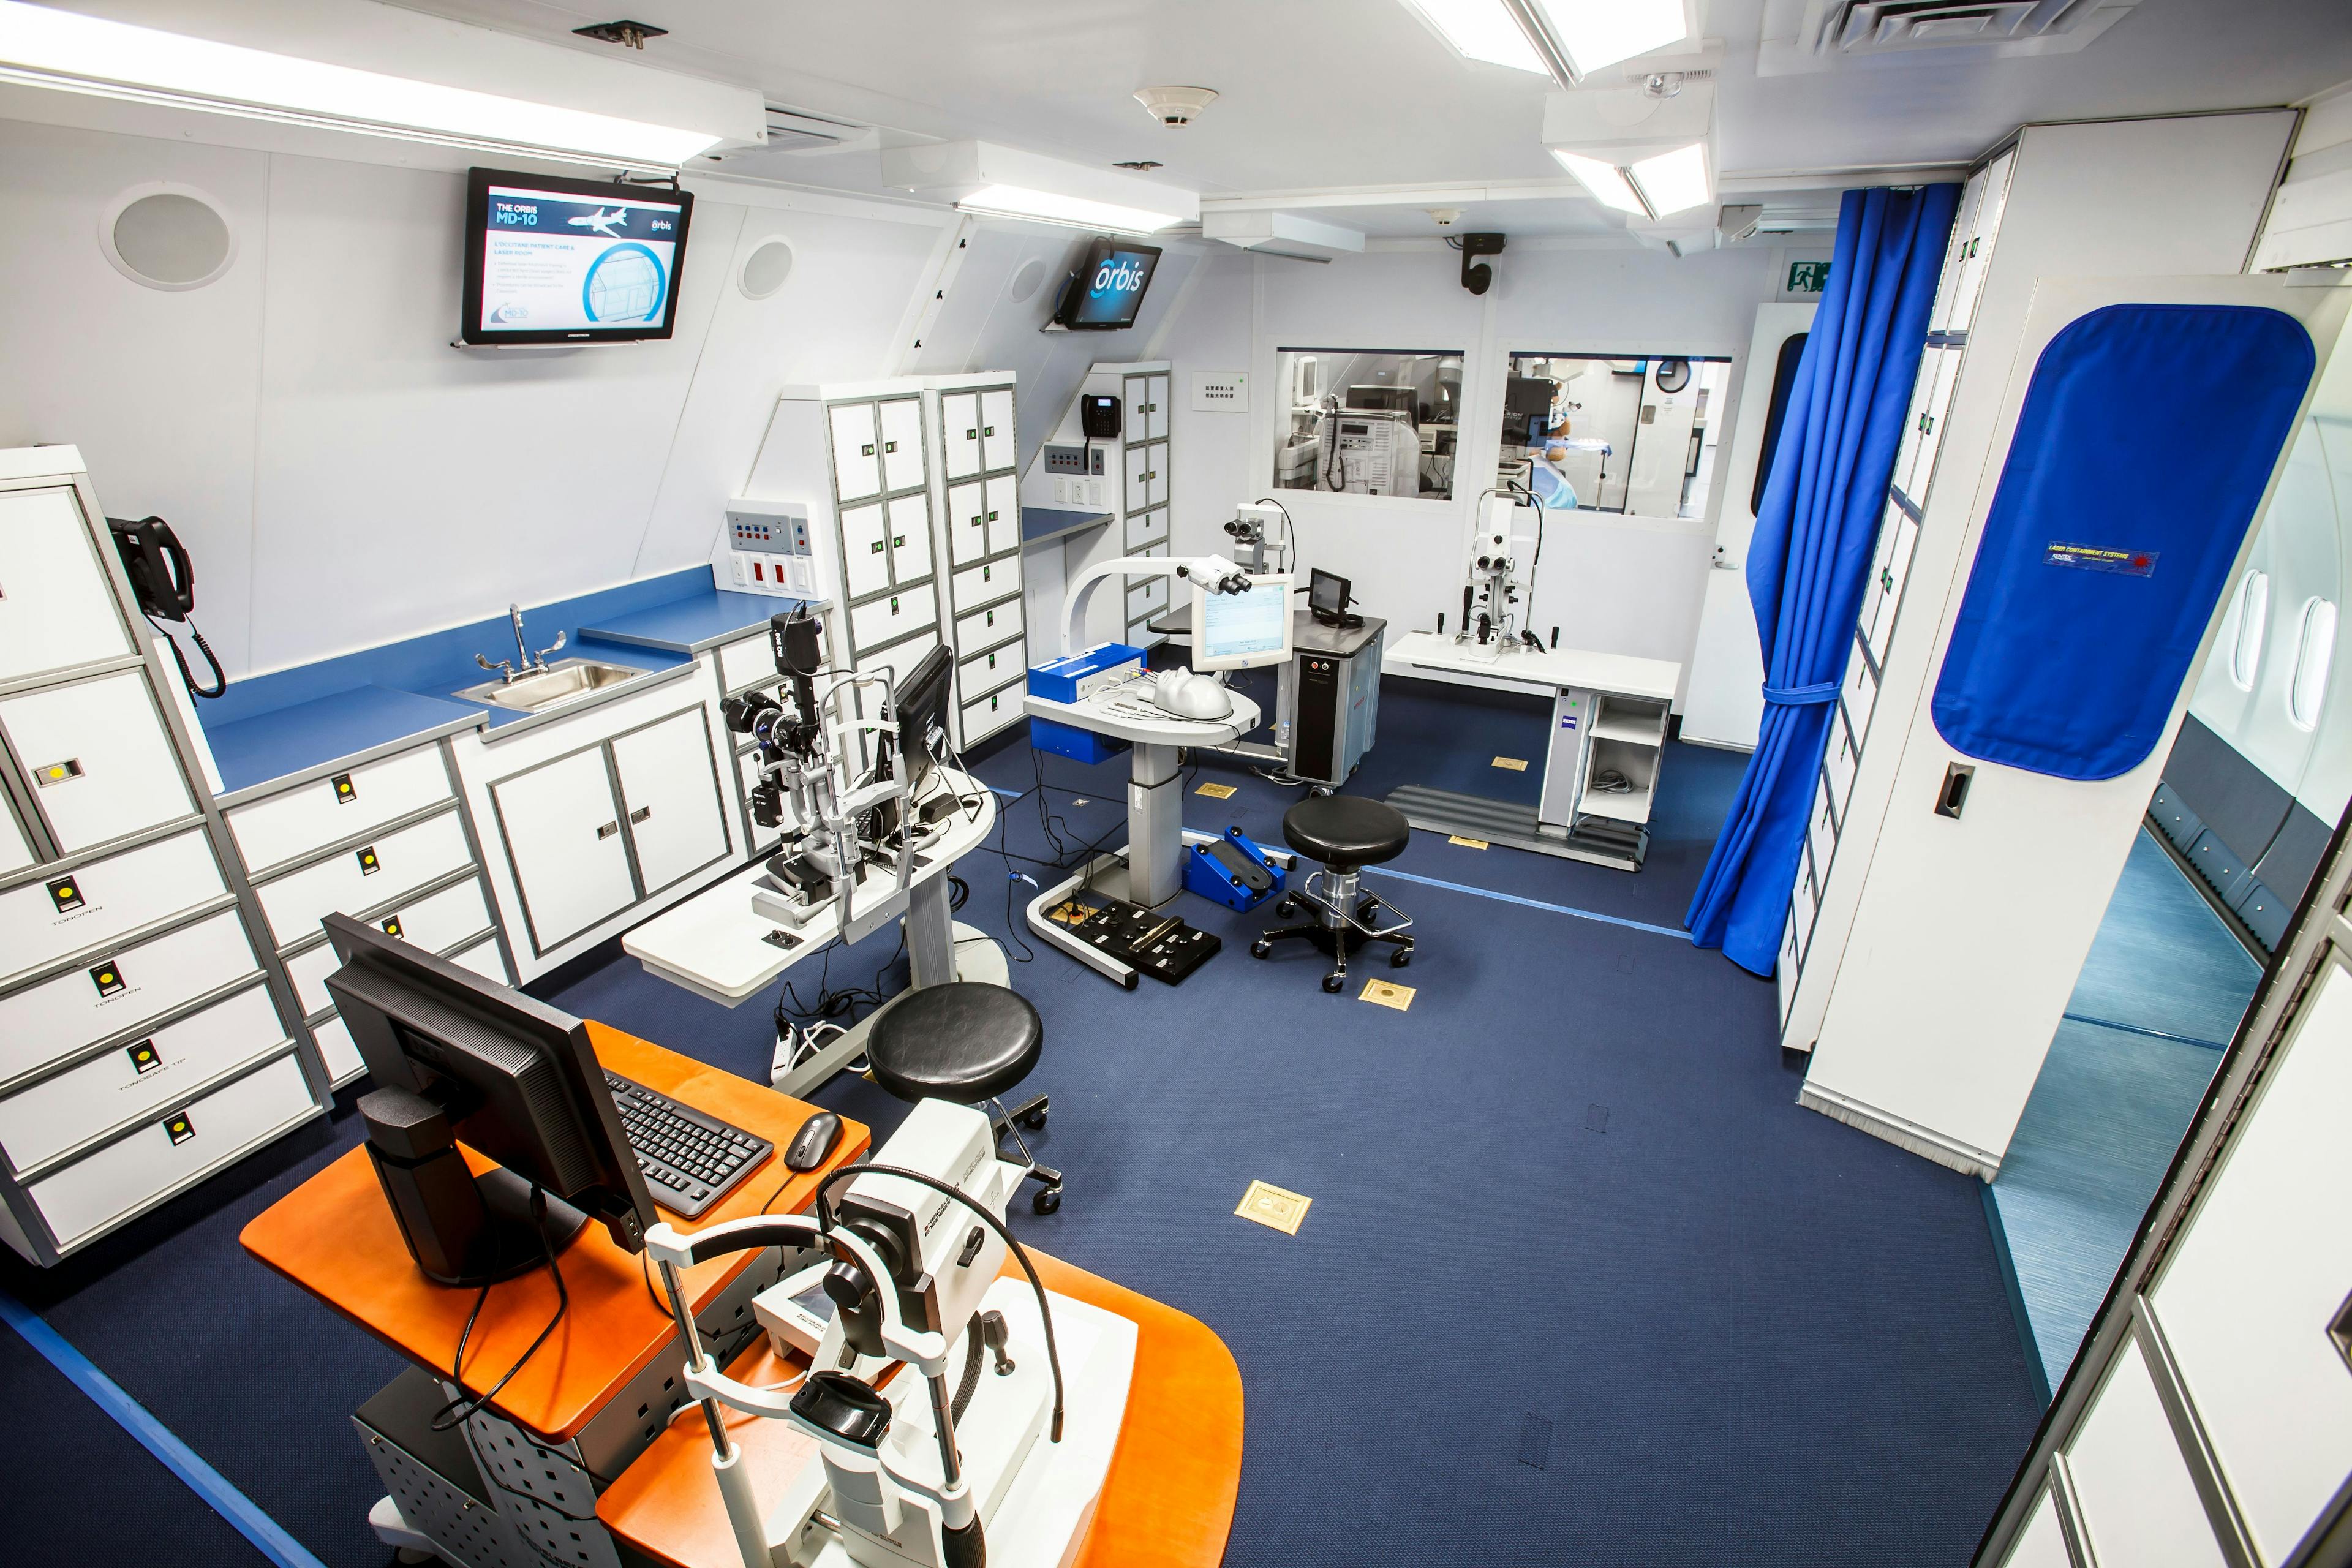 The Patient Care, Simulation Training and Laser Treatment room aboard the Orbis Flying Hospital.